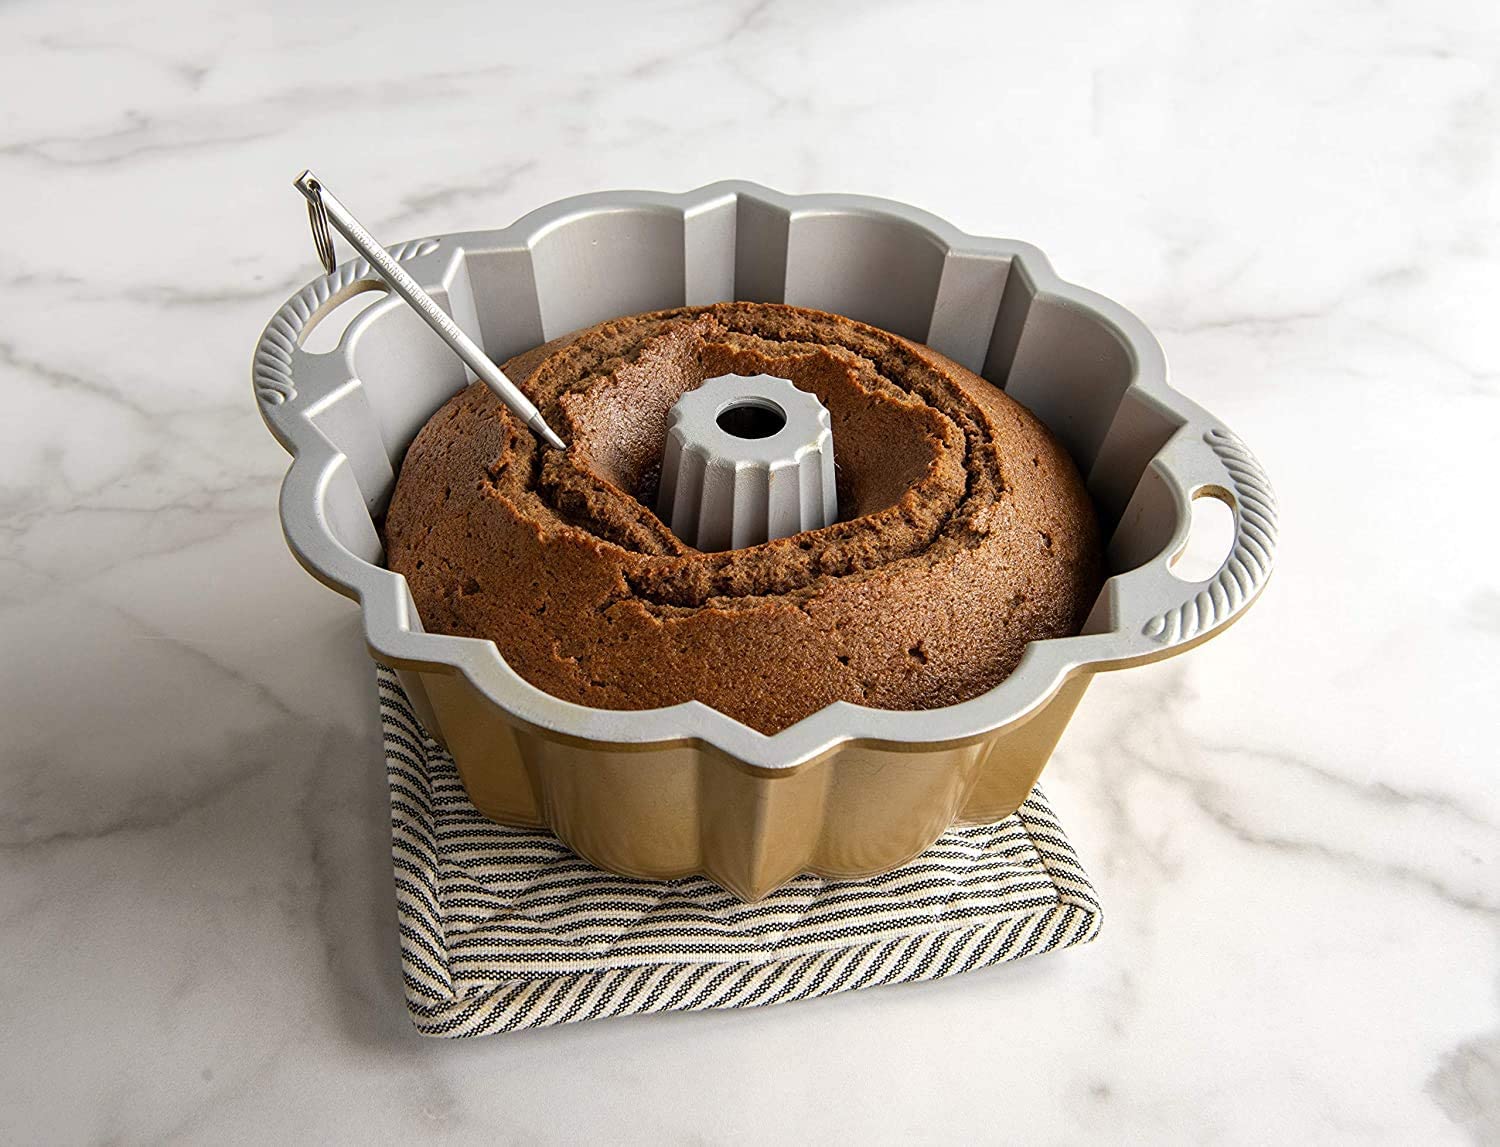 Nordic Ware BUNDT Cake Thermometer~ So Easy to Use!